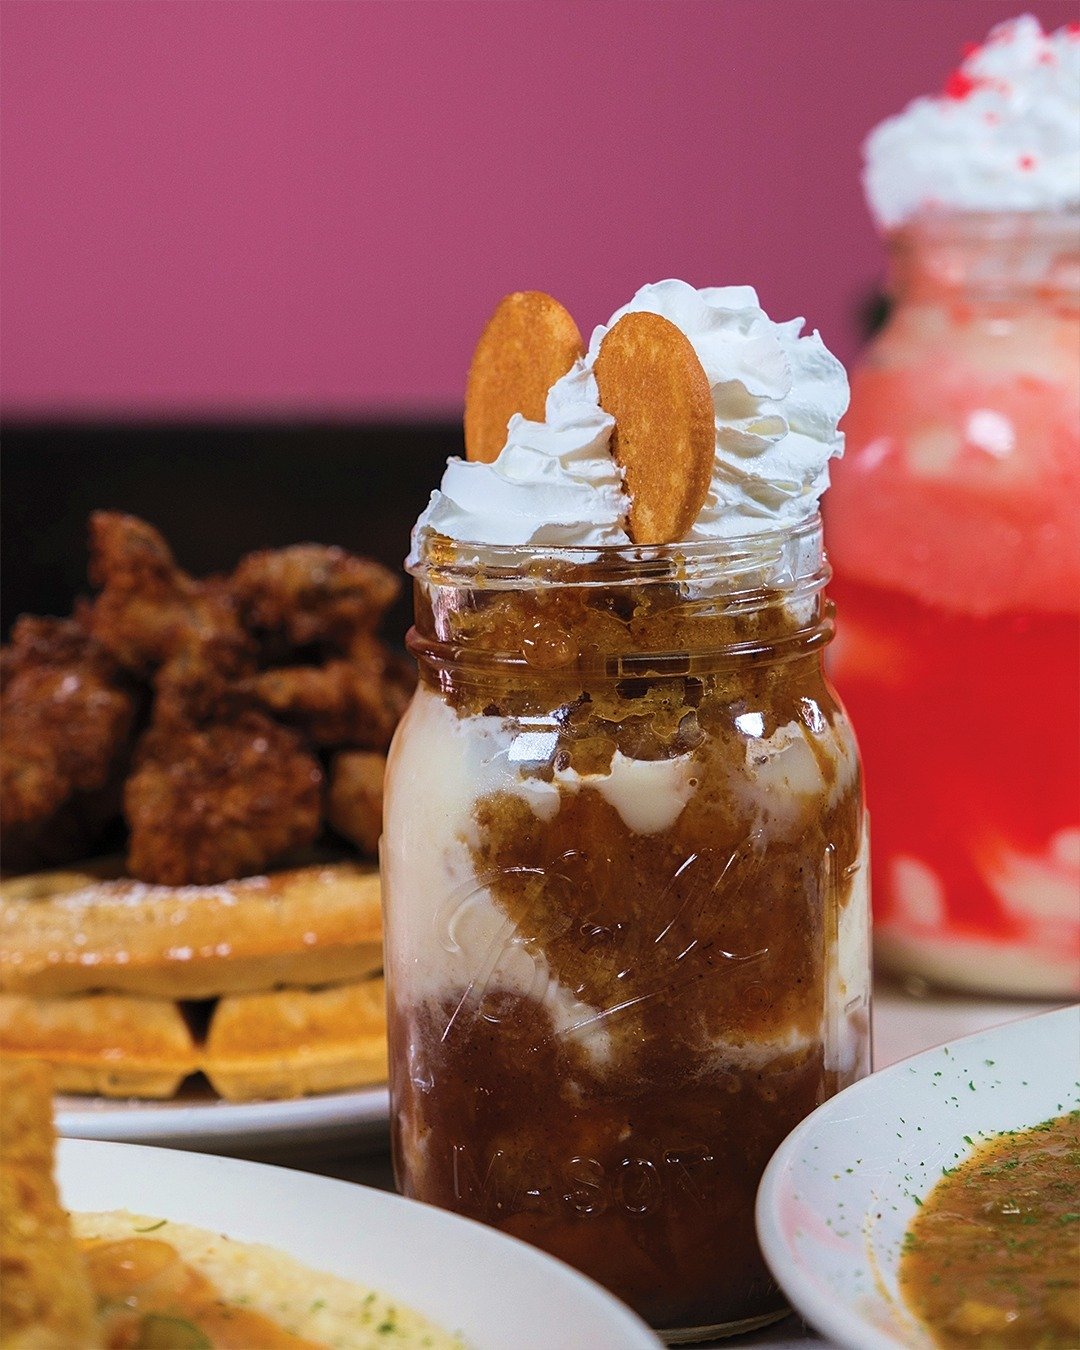 Have you tried our shakes or stacks at Nana&rsquo;s?? Our Peach Cobbler Stack will get you hooked!

Pick yours up today!

🌱Nanas Kitchen
🗓️Tue-Sun 11am-7pm
💻www.nanaskitchenaz.com
📍777 N Arizona Ave Suite 7 Chandler